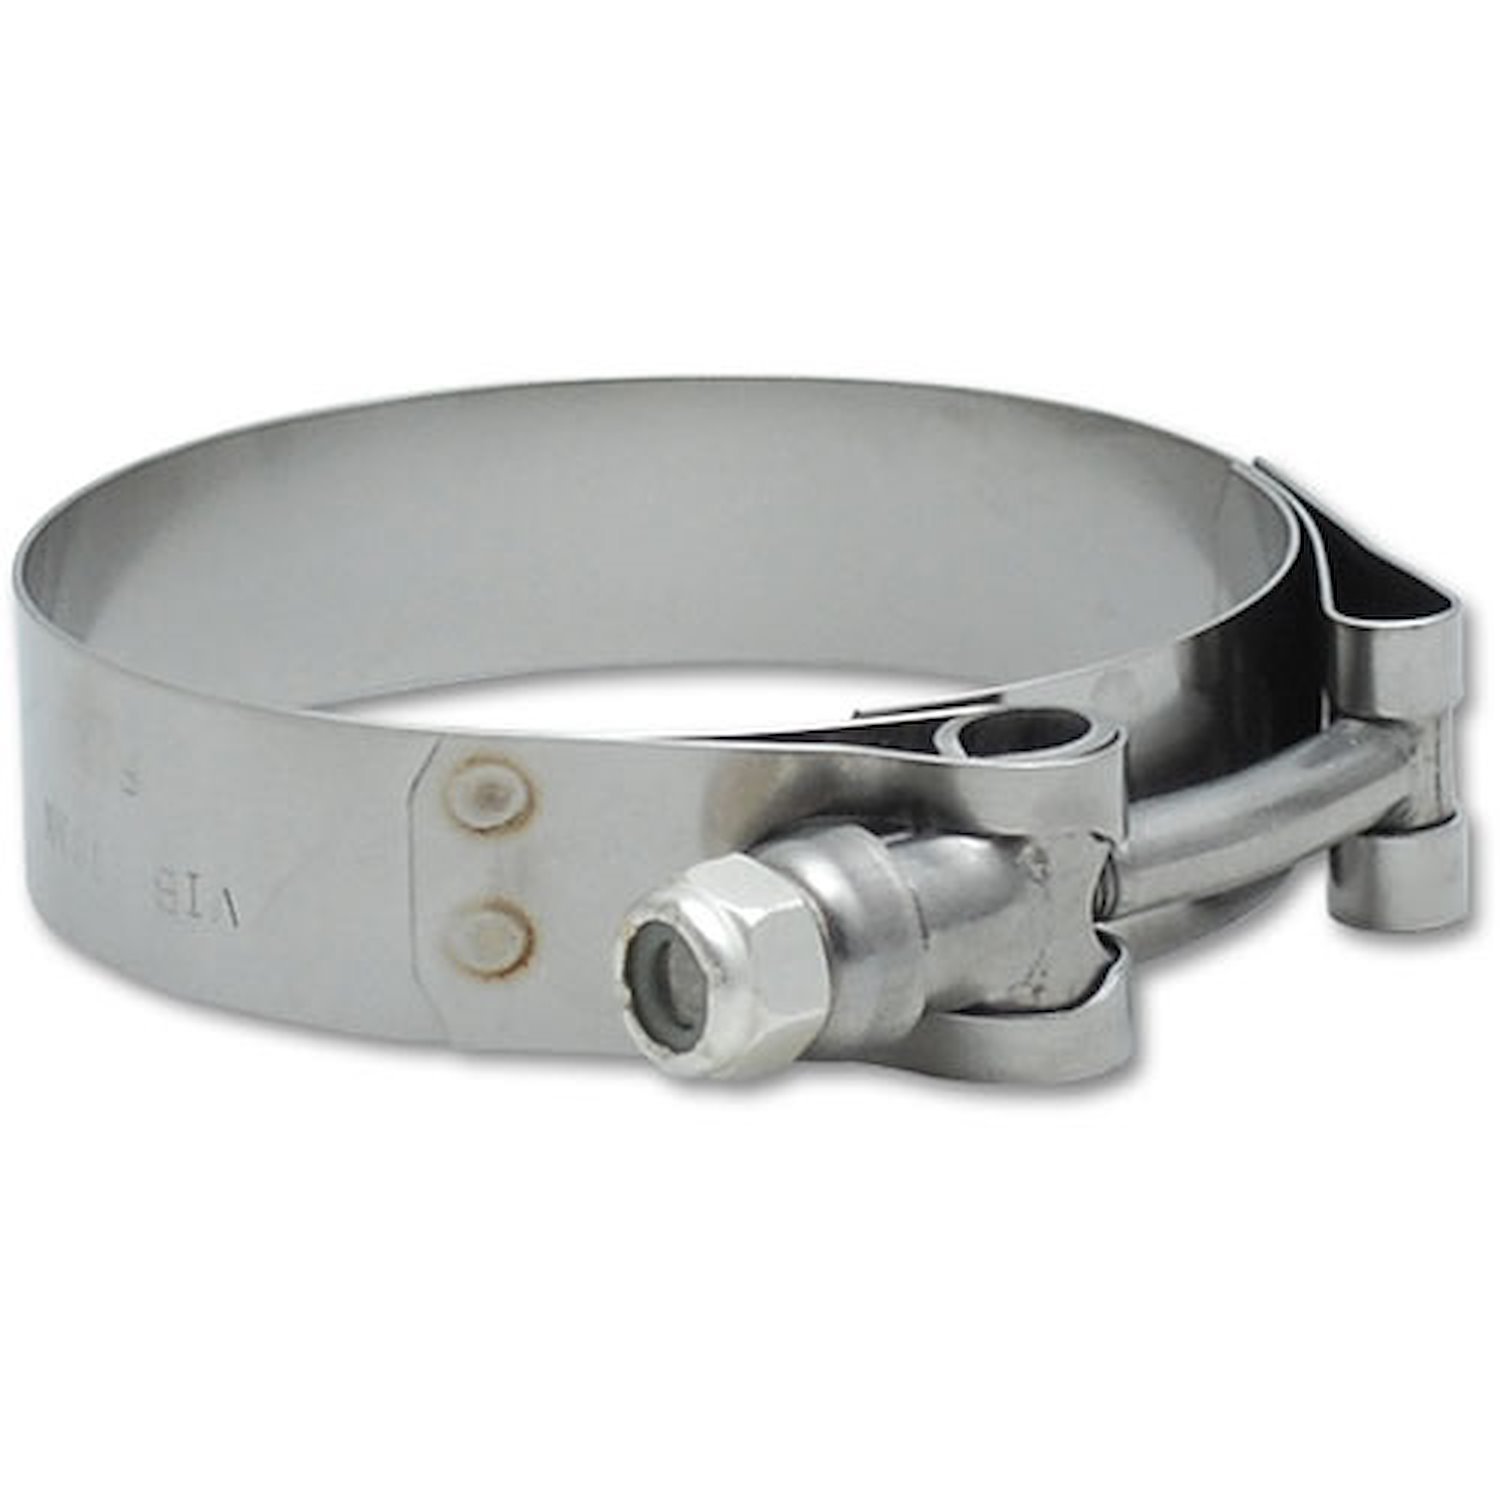 Stainless Steel T-Bolt Clamps Clamp Range 3.01" - 3.25"